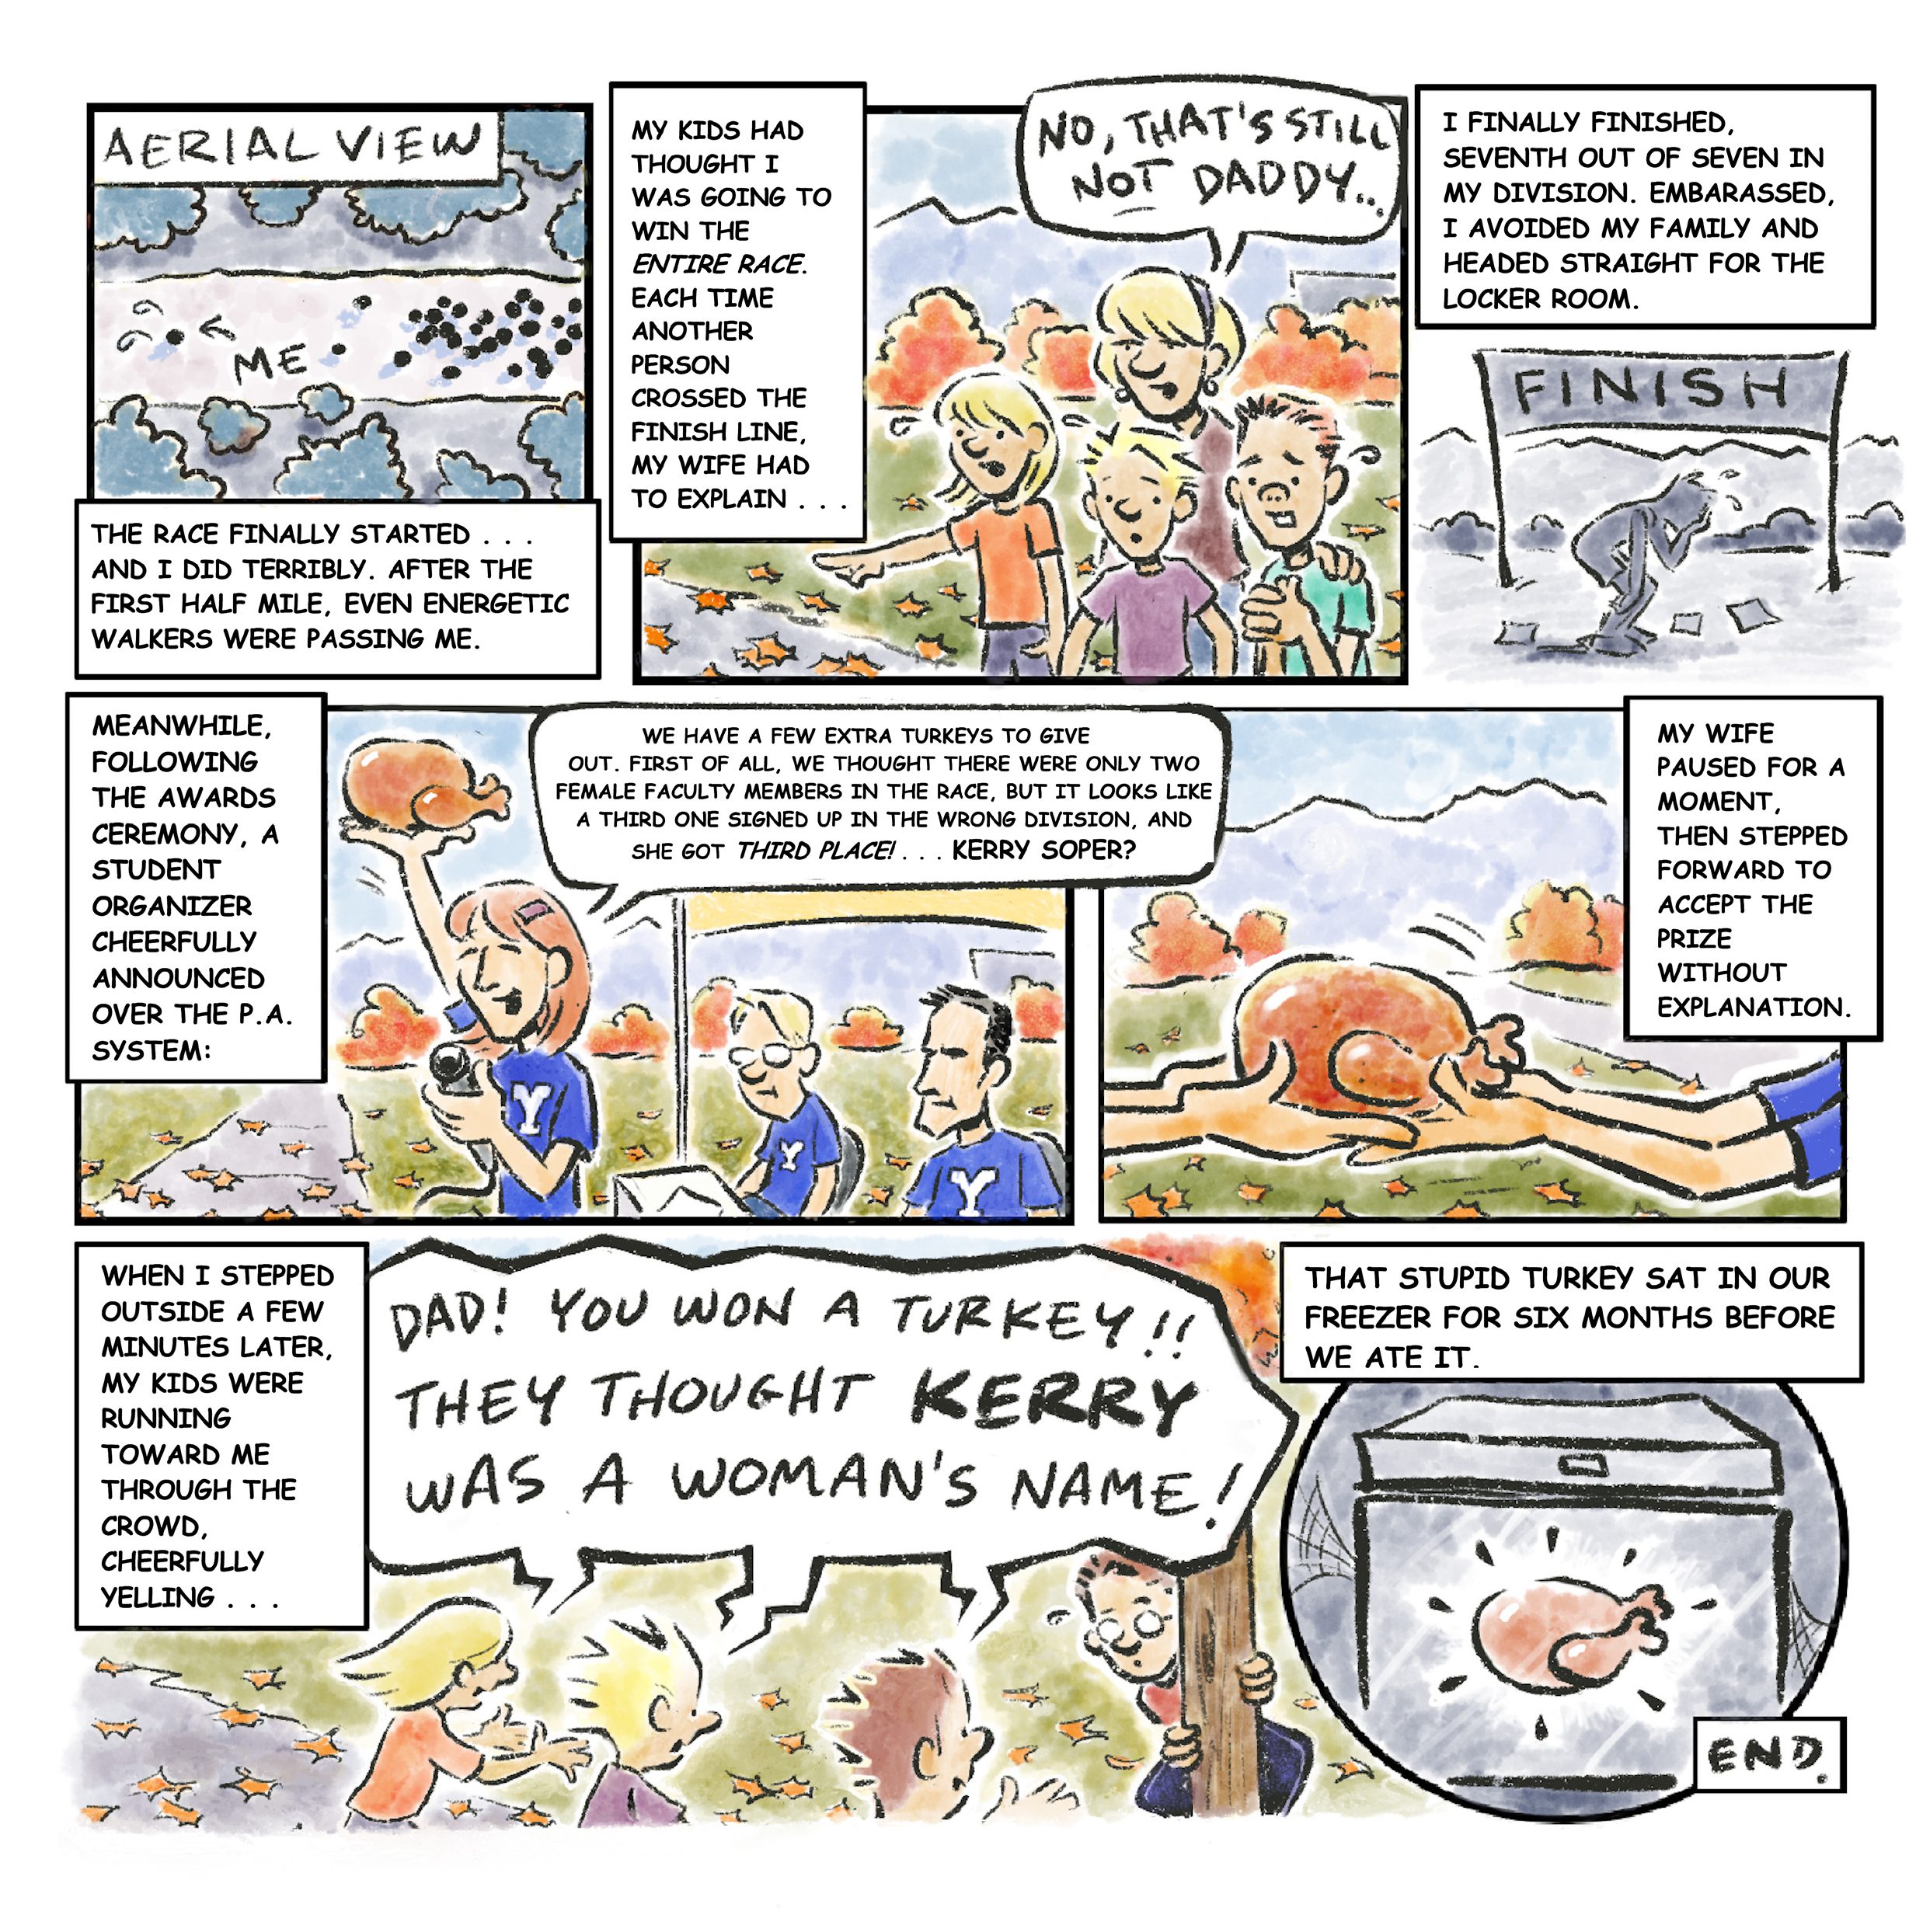 Turkey Trot comic, part 2: Panel 1: This art is labeled “Aerial View.” It has a lot of black dots on a trail representing racers as seen from above. There is a large pack of runners all together and then one significantly behind the others. This one is labeled with an arrow that says, “me.” The text box reads: “The race finally started, and I did terribly. After the first half mile, even energetic walkers were passing me.” Panel 2: The art shows Kerry’s family waiting nervously at the finish line pointing and watching. A speech bubble coming from his wife reads, “No, that’s still not daddy . . . ” The text box says: “My kids had thought I was going to win the entire race. Each time another person crossed the finish line, my wife had to explain . . . ” Panel 3: This illustration is also in black and white. It shows the silhouette of Kerry devastated with his head in his hands at the finish line of the race. The text box reads: “I finally finished. Seventh out of seven in my division. Embarrassed, I avoided my family and headed straight for the locker room.” Panel 4: The art depicts one of the same women who was seated at the registration table making an announcement and holding up a turkey. The text box reads: “Meanwhile, following the awards ceremony, a student organizer cheerfully announced over the P.A. system:” Her speech bubble coming from this student says, “We have a few extra turkeys to give out. First of all, we thought there were only two female faculty members in the race, but it looks like a third one signed up in the wrong division. And she got THIRD PLACE! . . . Kerry Soper?” Panel 5: The art here shows a close-up of two pairs of hands as one passes a turkey to the receiver. The text box reads: “My wife paused for a moment, then stepped forward to accept the prize without explanation.” Panel 6: Kerry is hiding behind a pole as his three children excitedly run towards him. The text box says: “When I stepped outside a few minutes later, my kids were running toward me through the crowd, cheerfully yelling . . . ” A speech bubble coming from all three of the children reads, “Dad! You won a turkey!! They thought Kerry was a woman’s name!” Panel 7: A black-and-white freezer contains a turkey. The turkey is in color and emphasized. The text box states: “That stupid turkey sat in our freezer for six months before we ate it.” END.